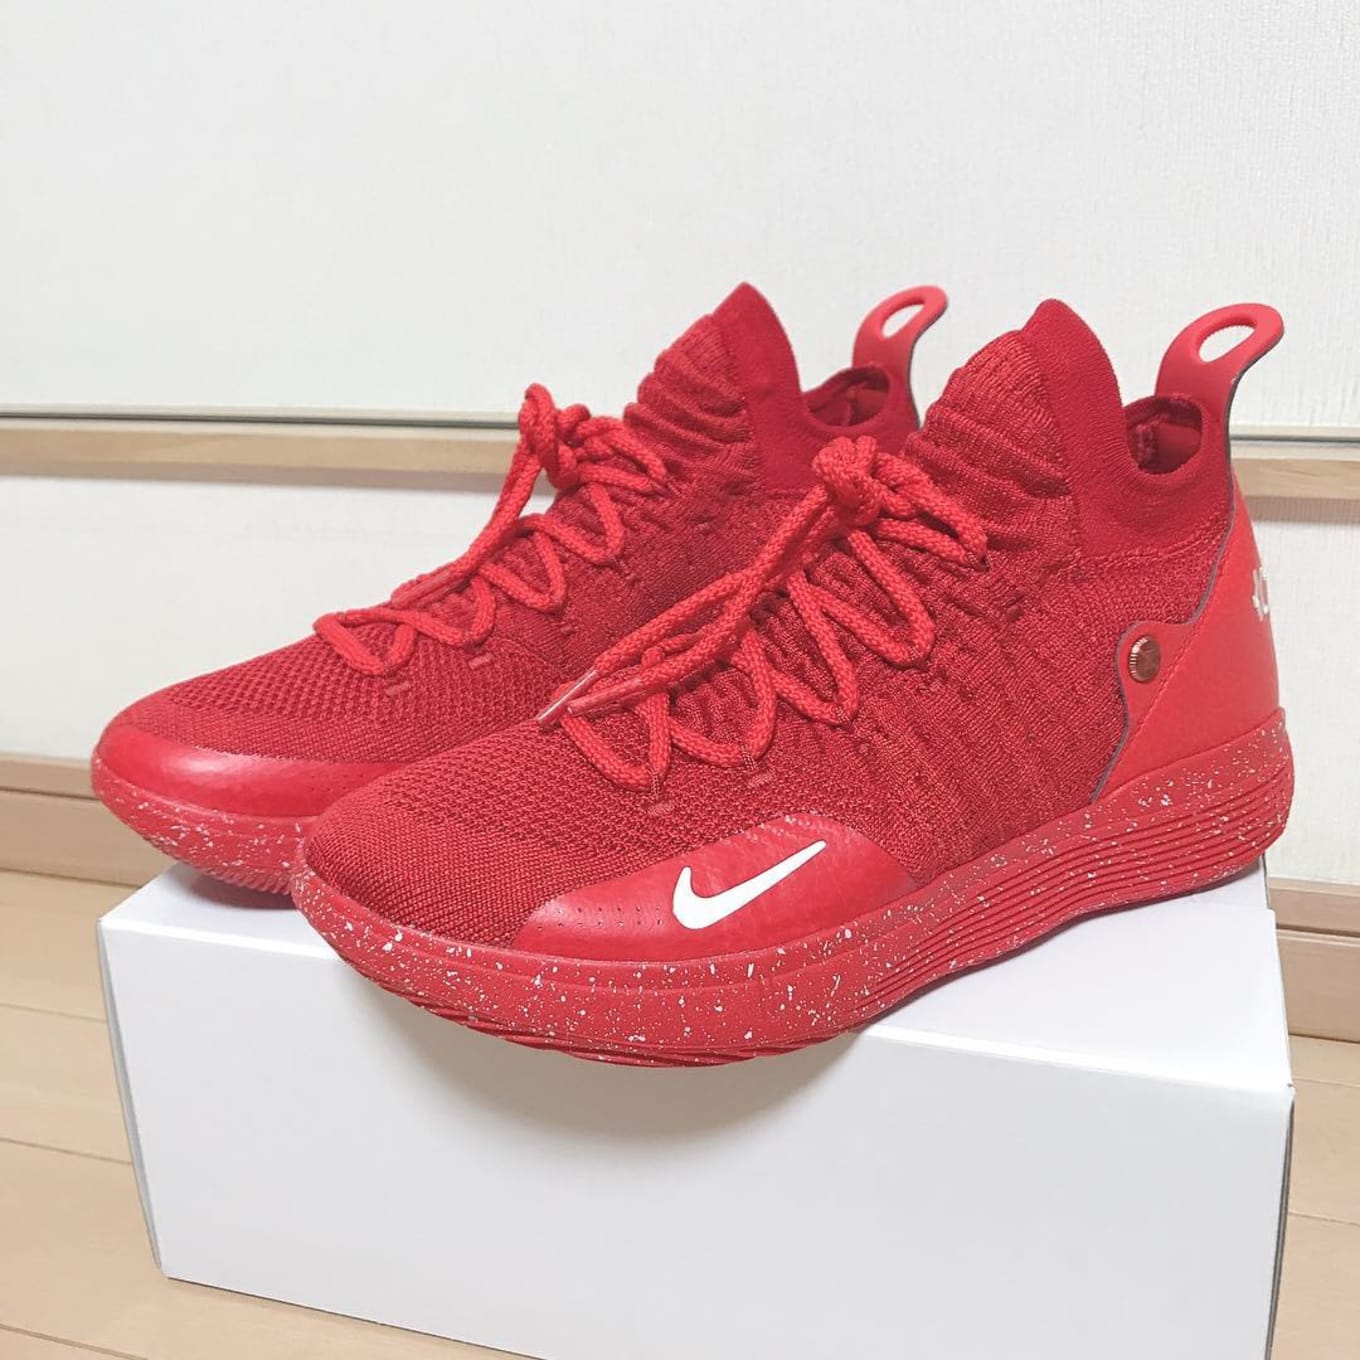 kd 11 red and white